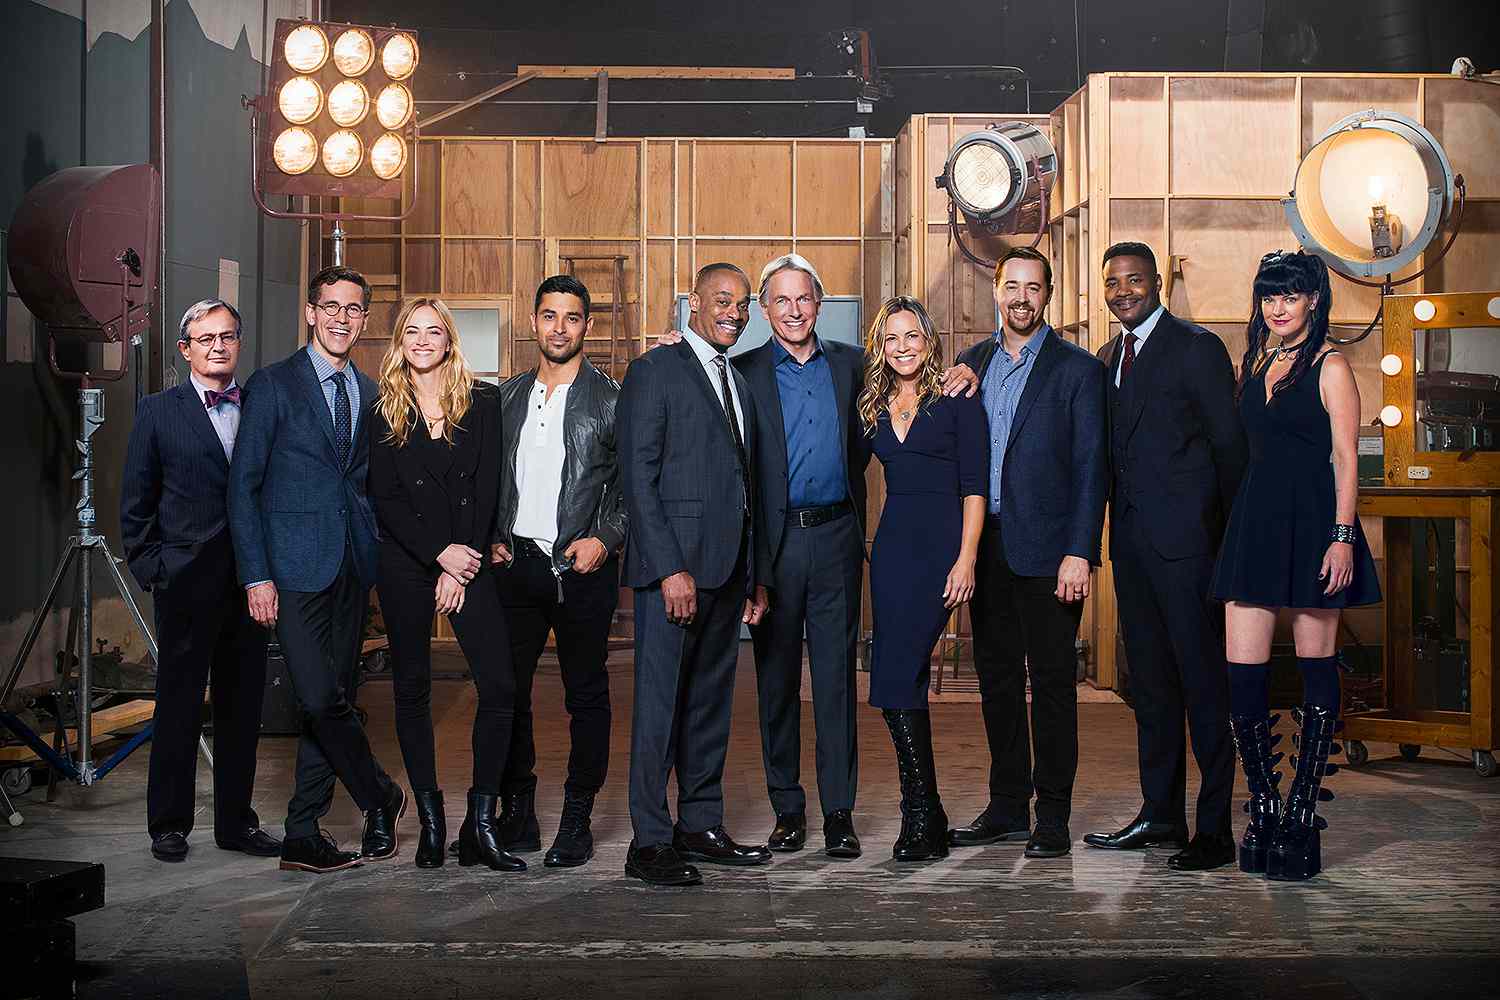 Is 'NCIS' Coming Back? Inside Scoop on Season 22's Cast, Plot, and Air Date Rumors